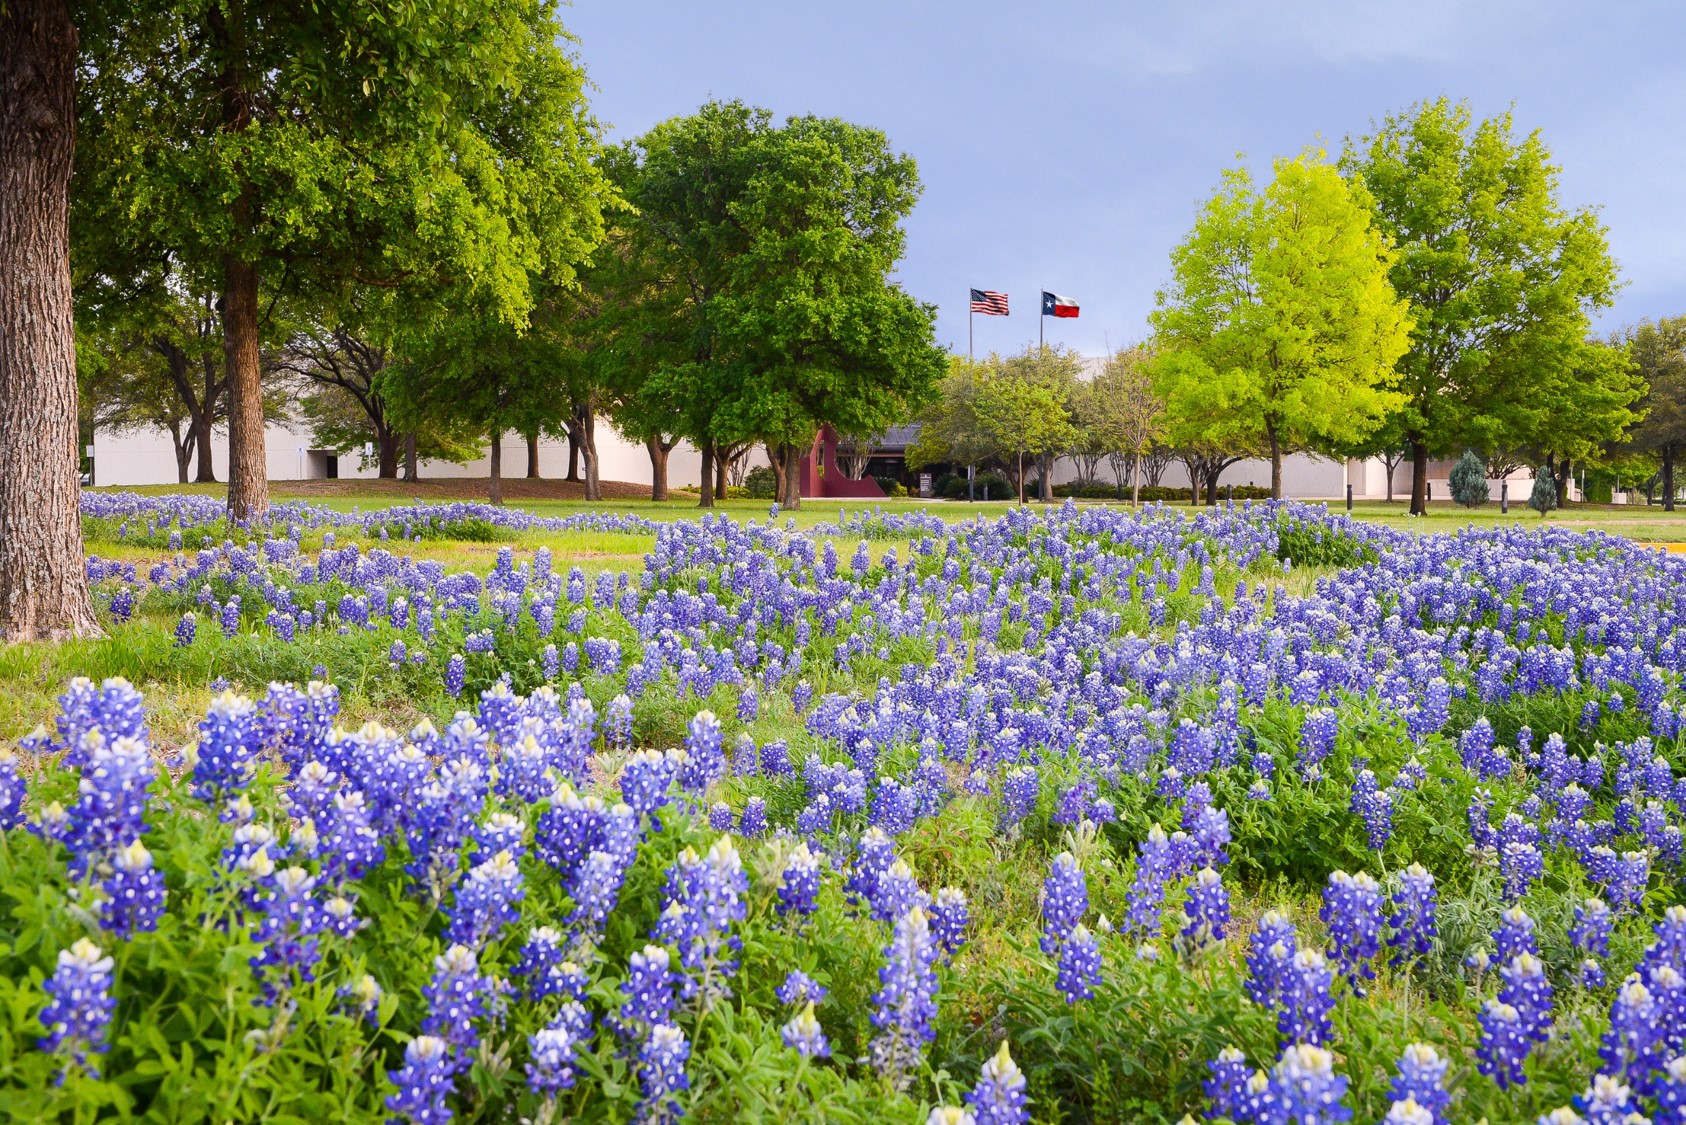 Commons with Bluebonnets